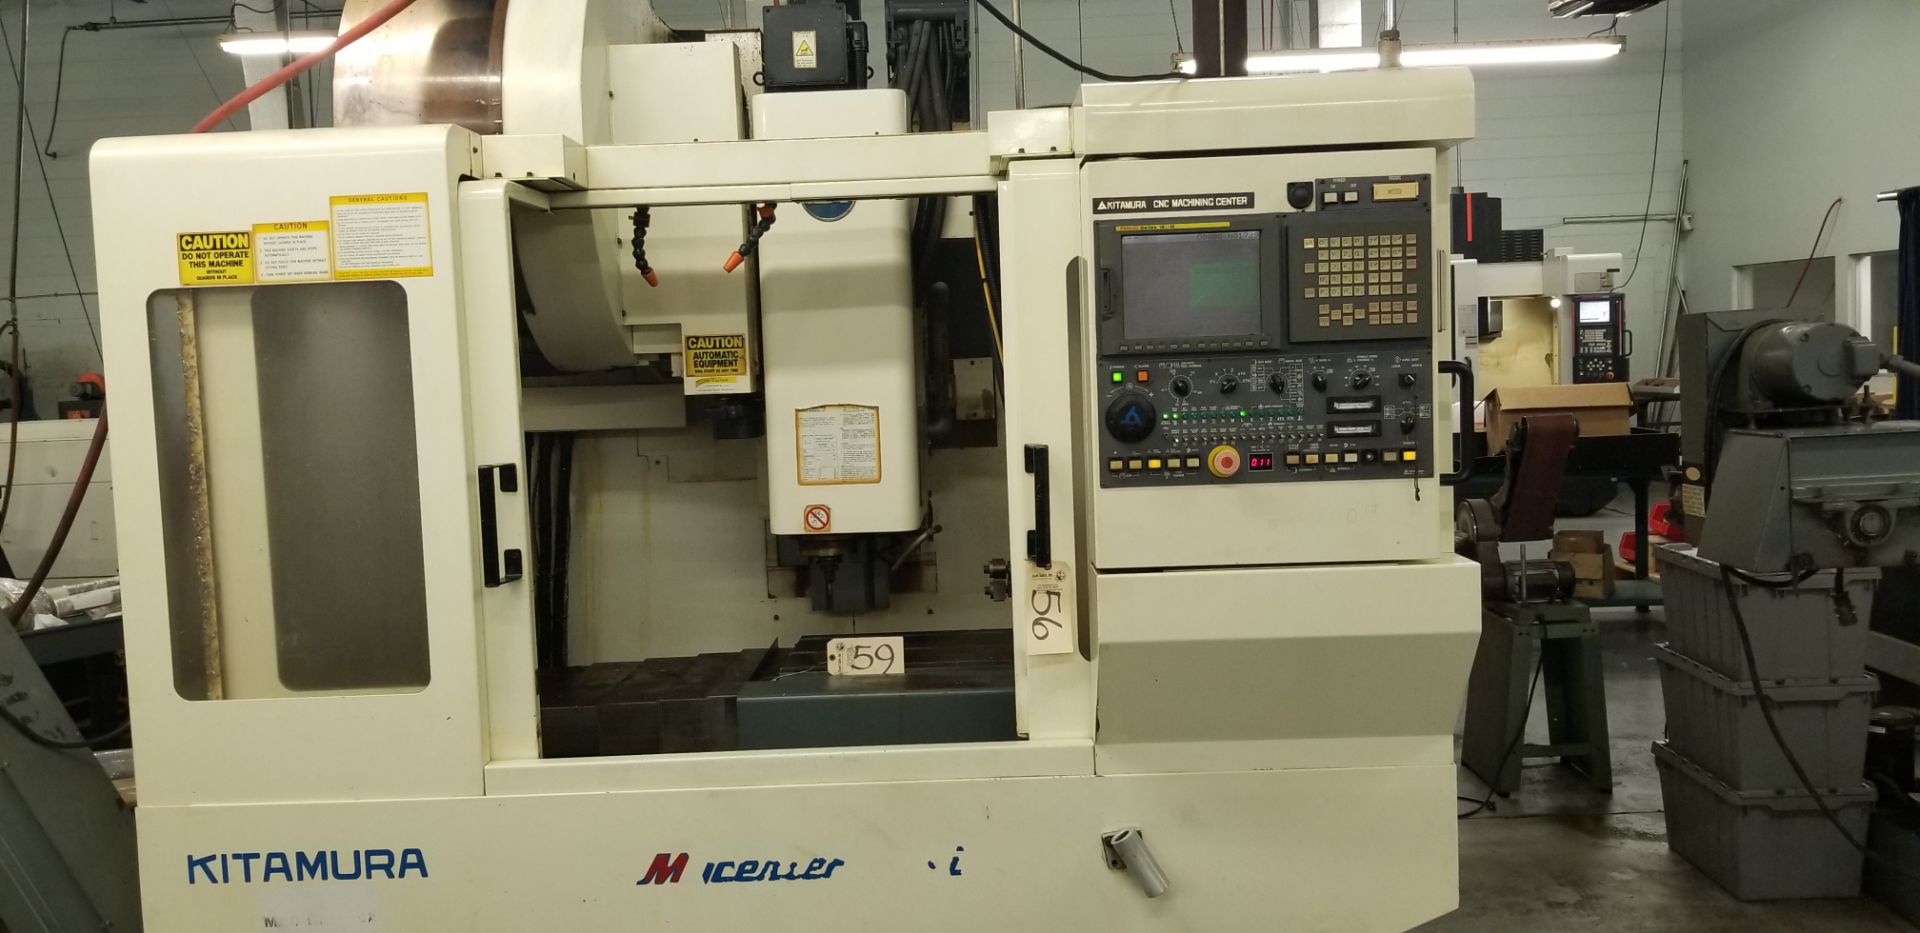 Kitamura MyCenter 3X/3Xi Wired for 4th Axis CNC Vertical Machining Center - Image 7 of 8